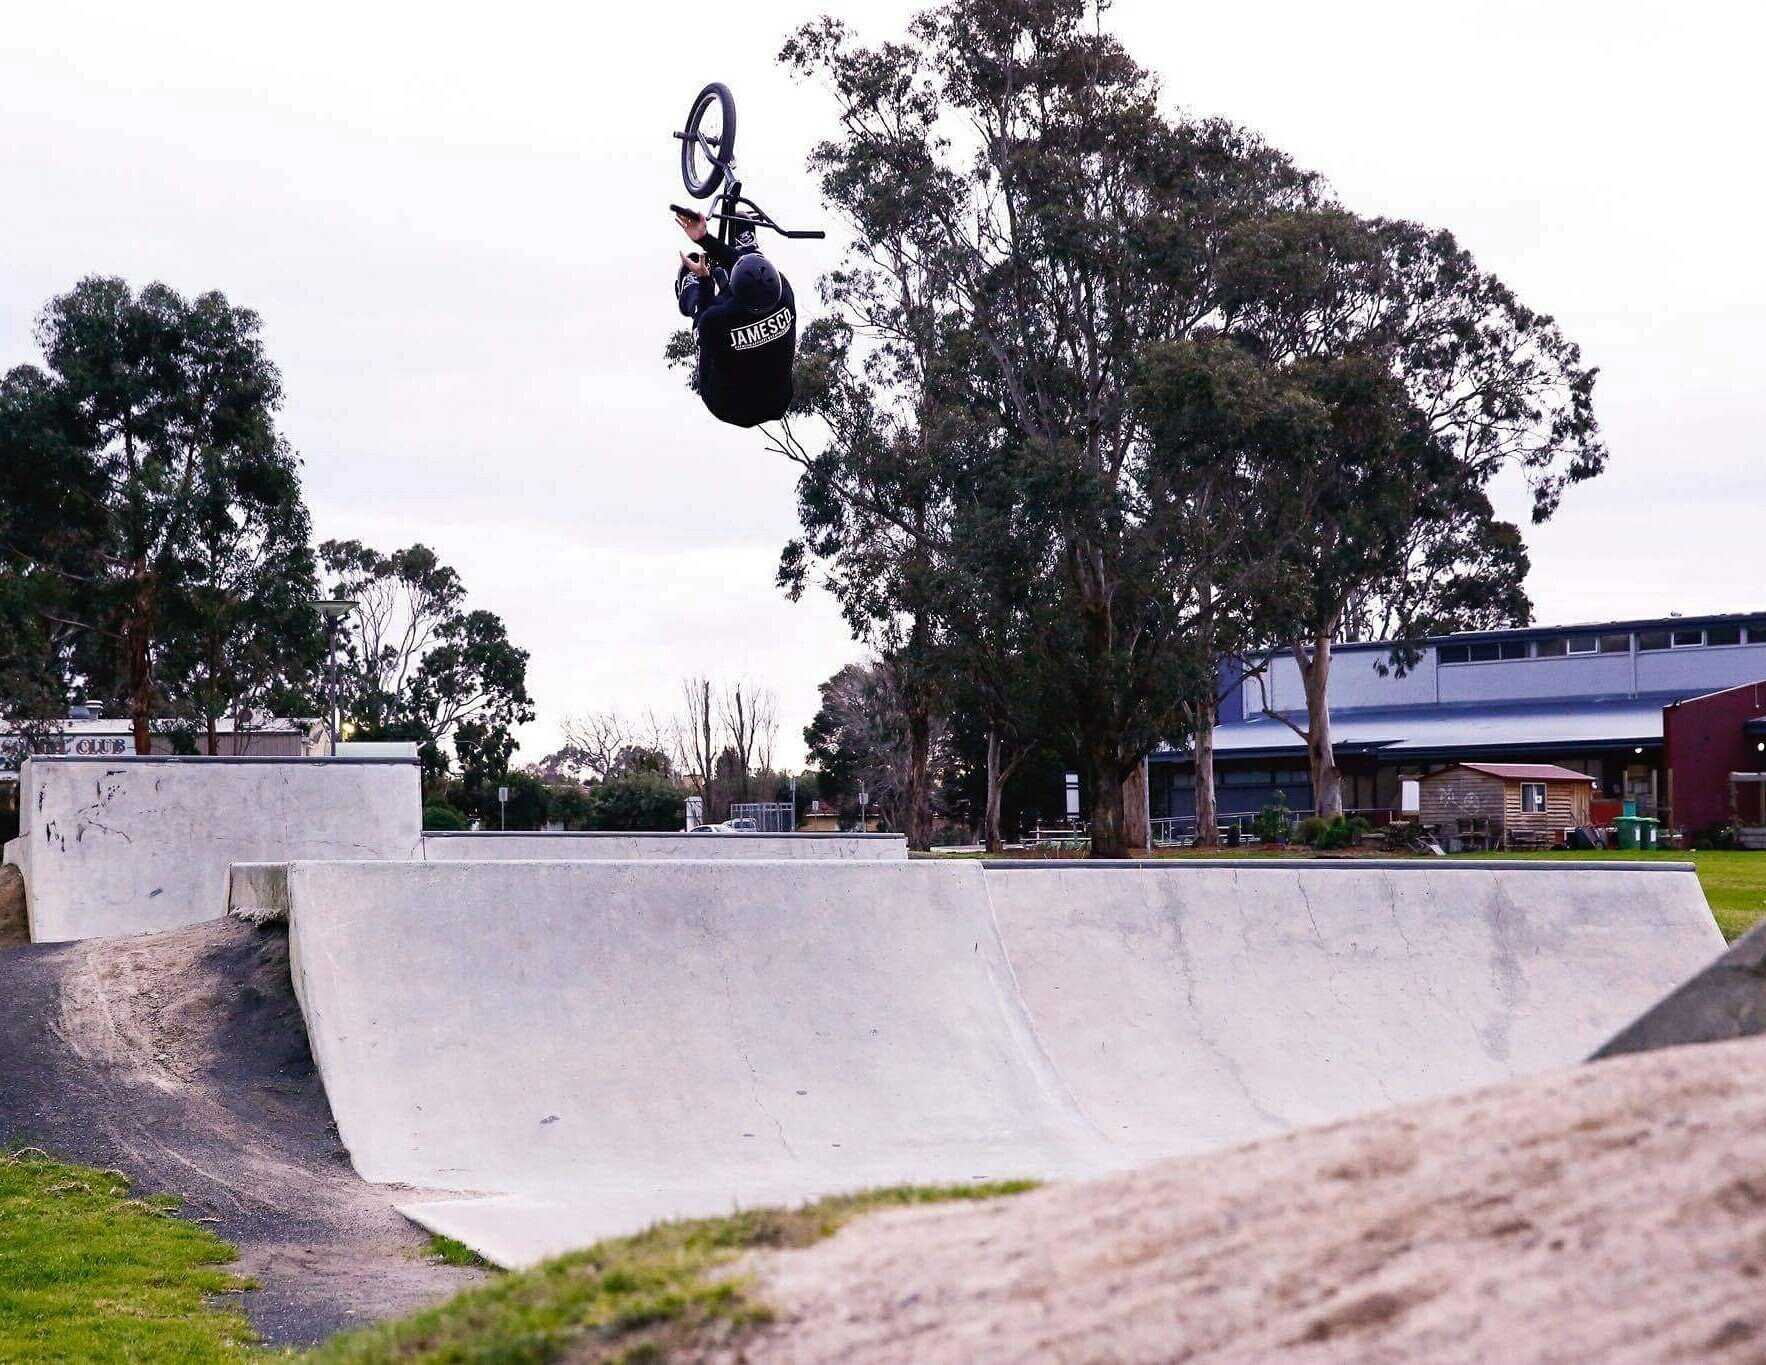 Chris Nicol, doing what he does best in Melbourne.